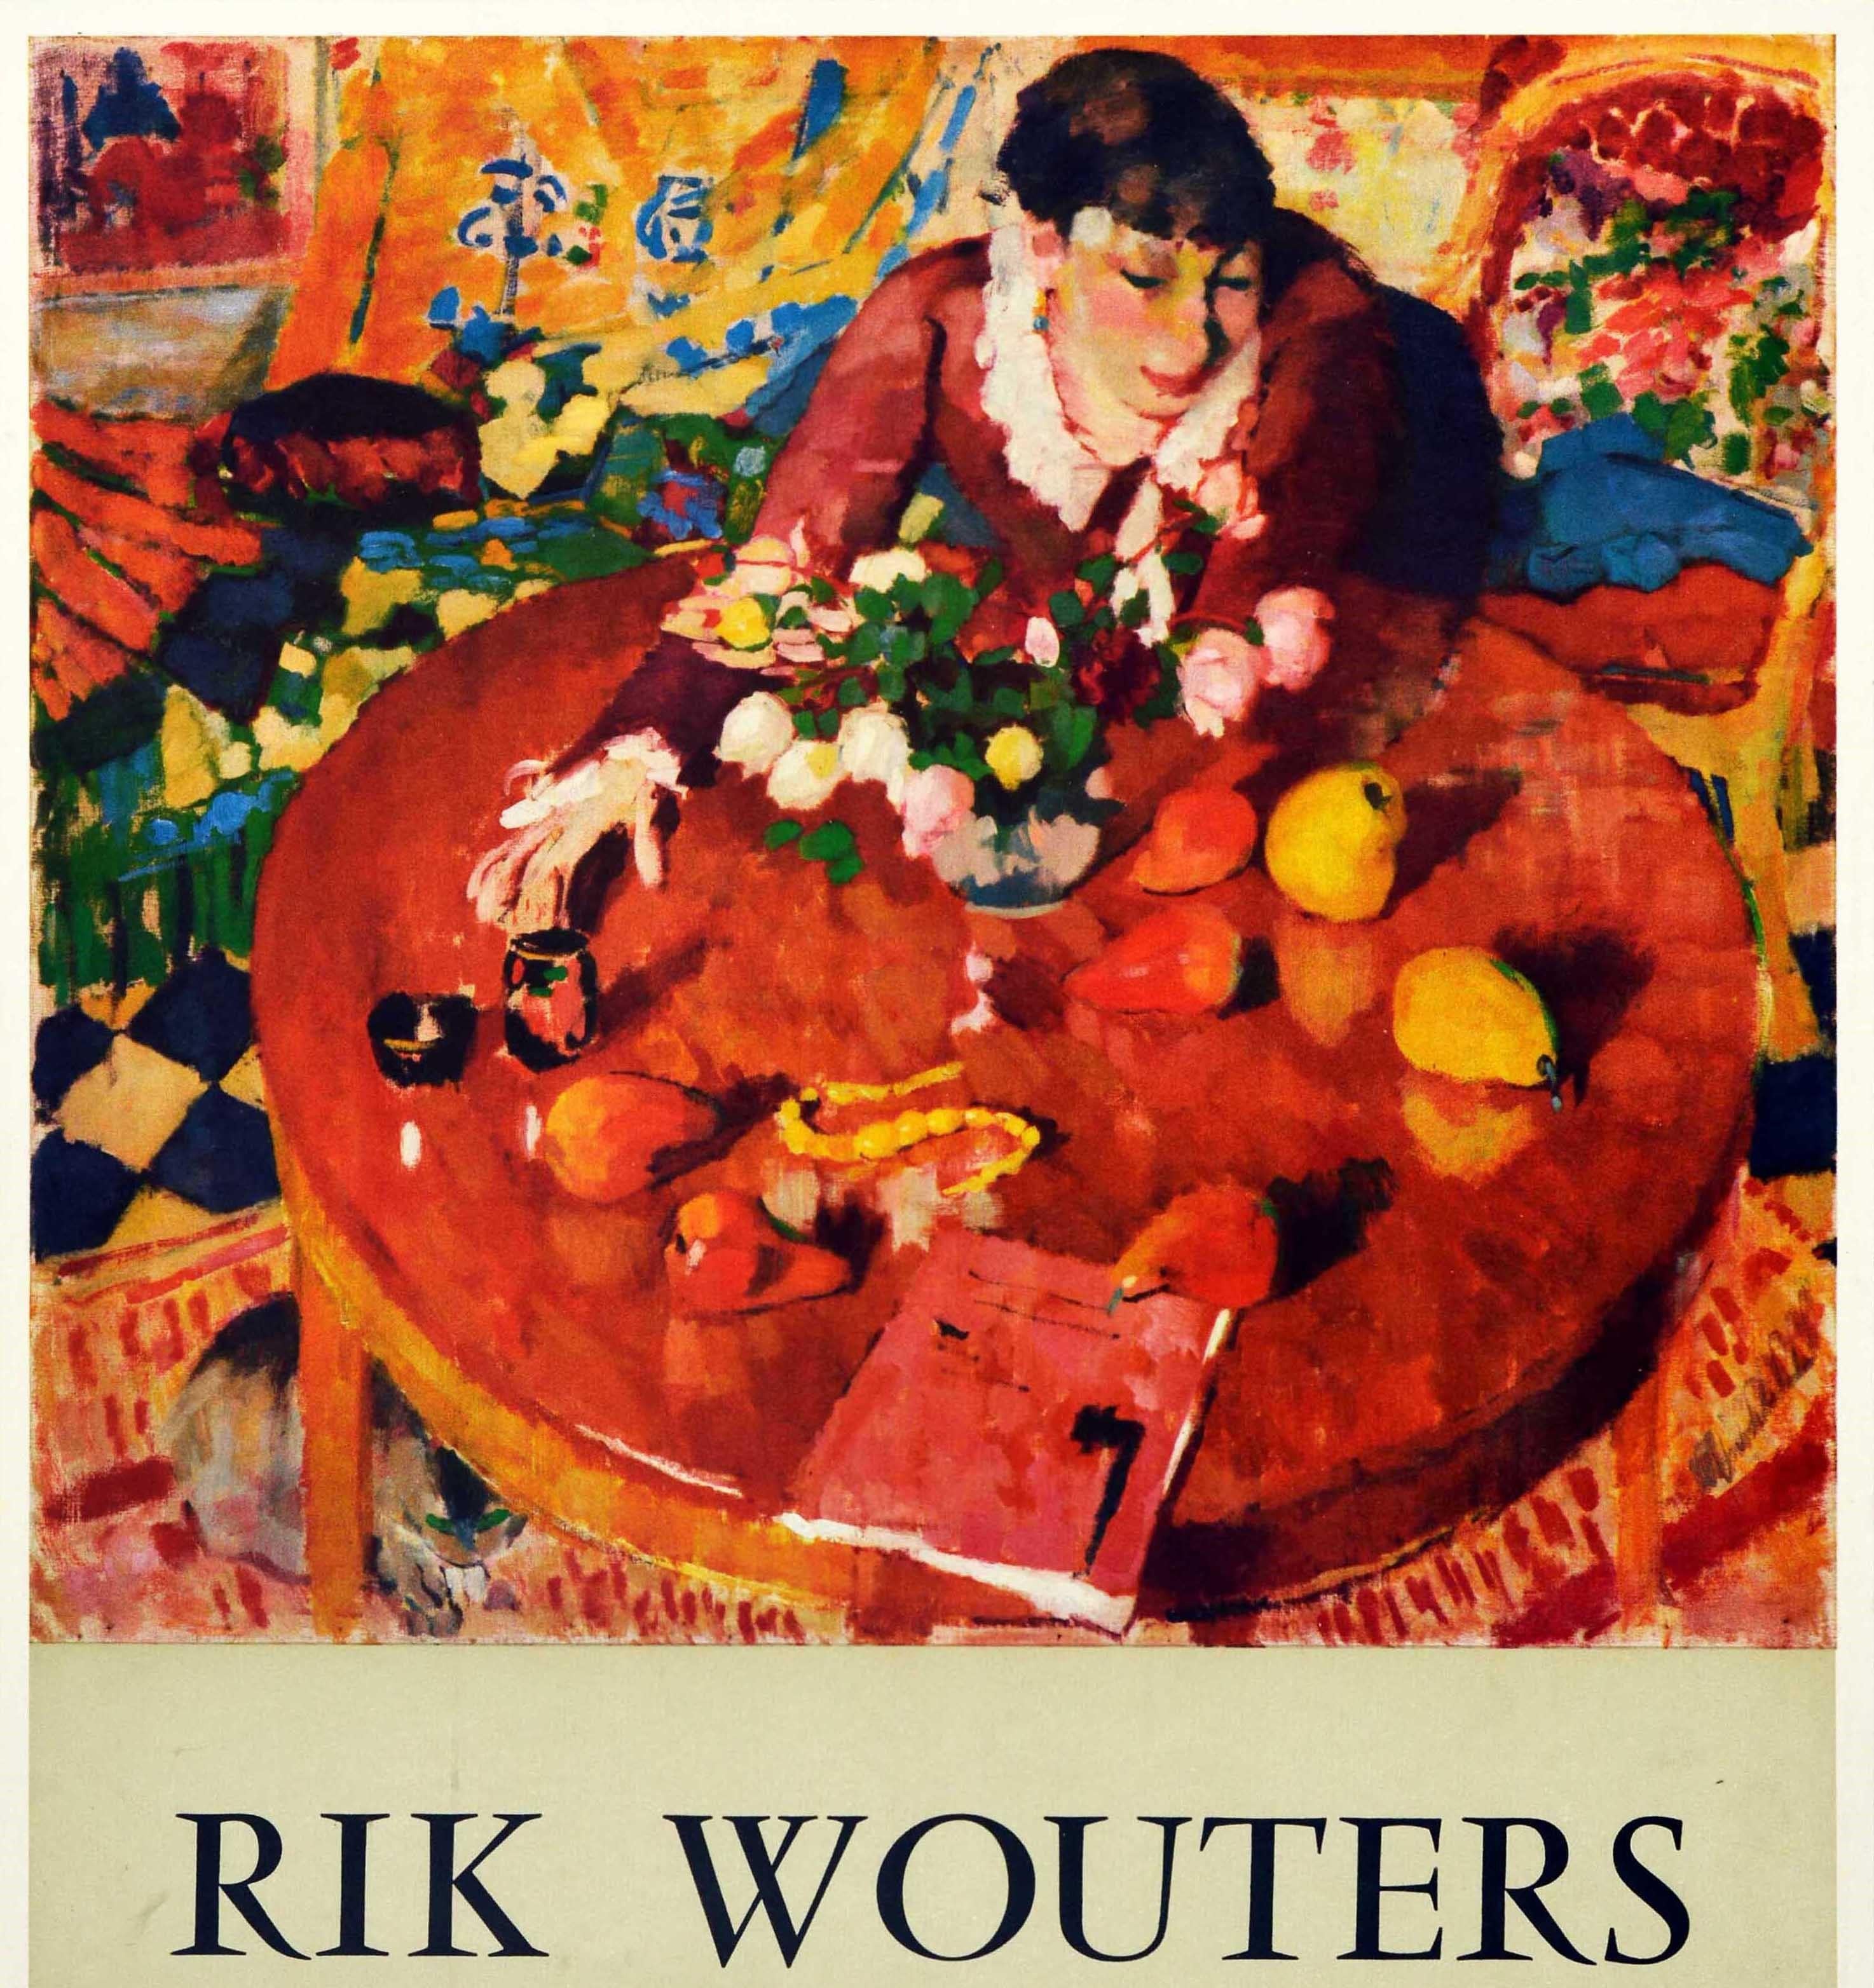 Original vintage advertising poster for a Rik Wouters art exhibition at the Musee National d'Art Moderne / National Museum of Modern Art 5 October to 17 November 1957, featuring a 1912 painting by the artist entitled Verjaardagsbloemen / Birthday